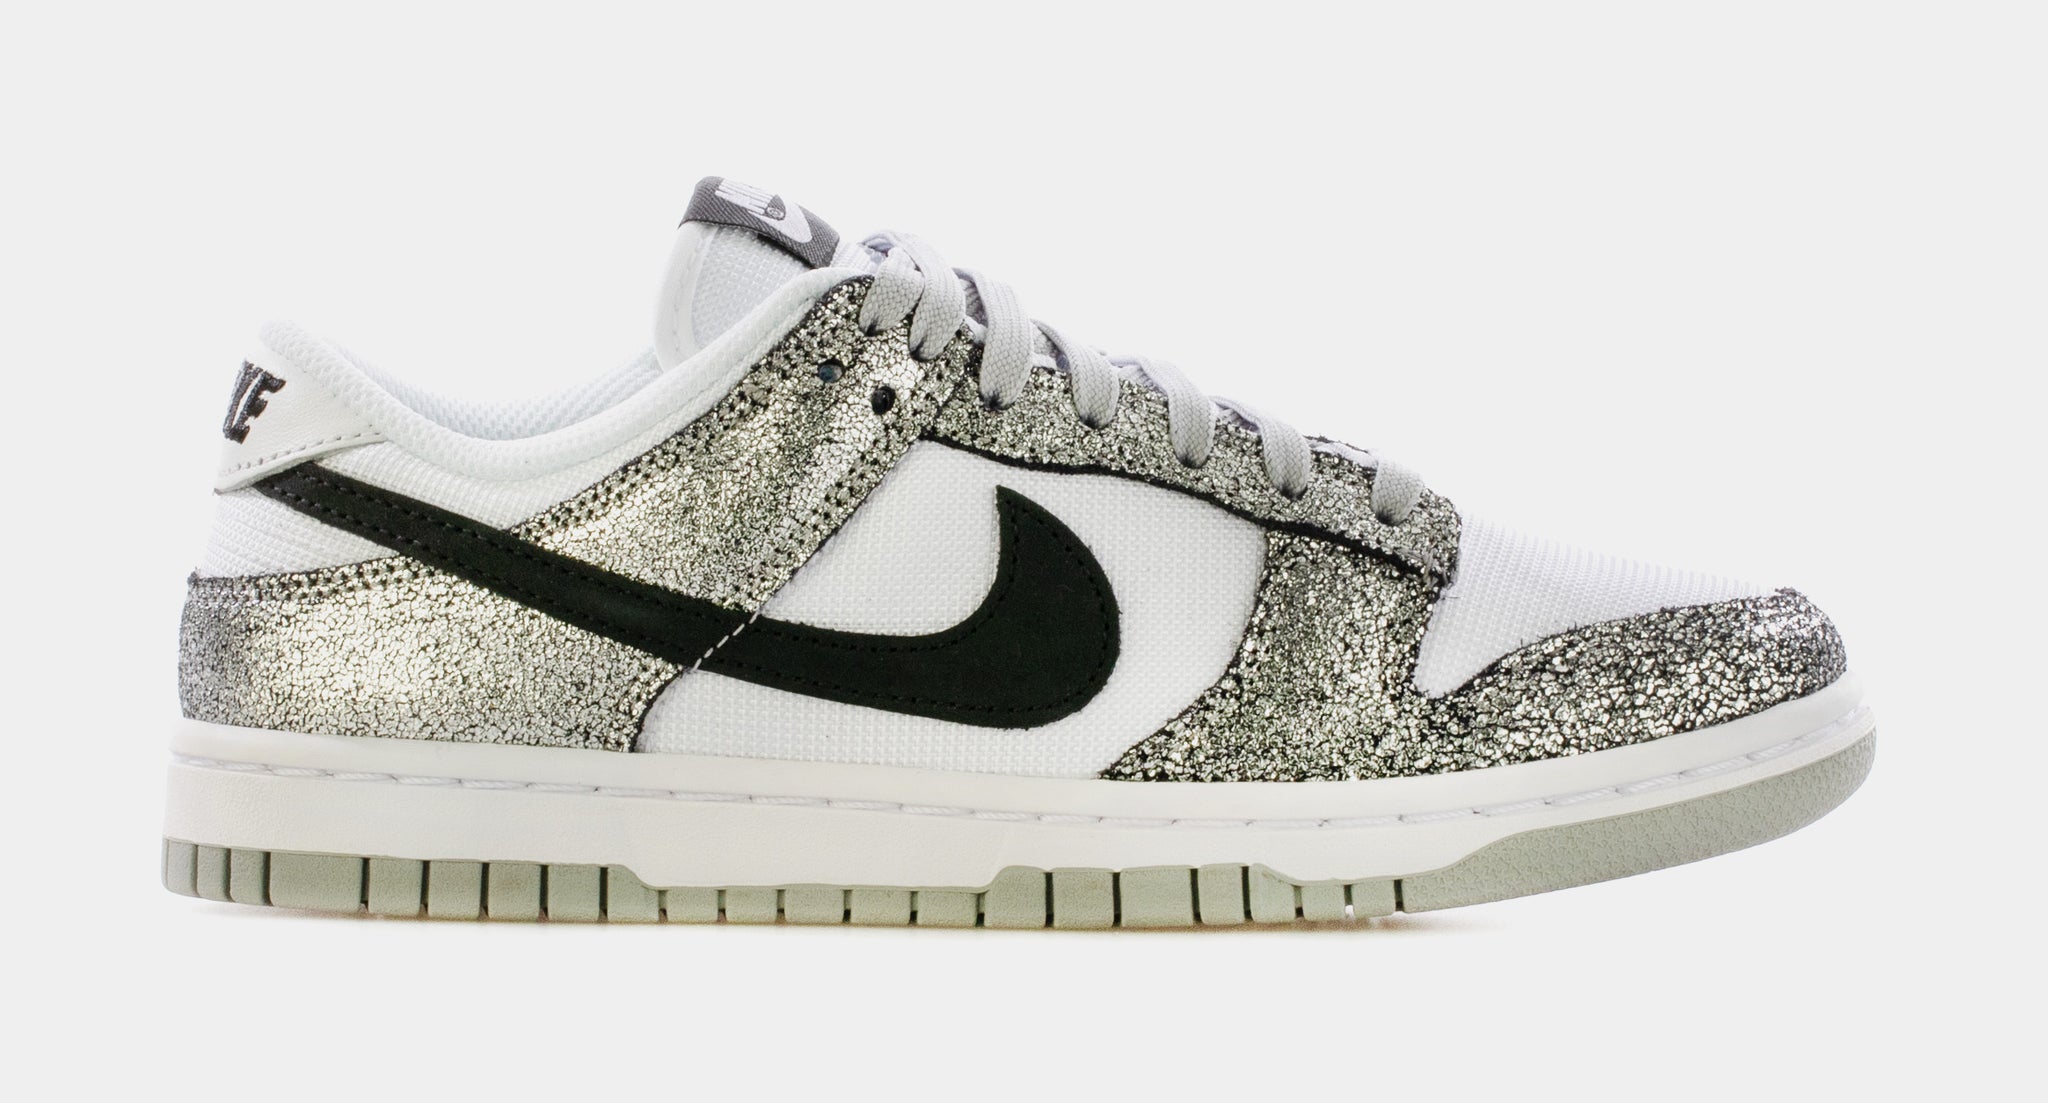 Dunk Low Golden Gals Womens Lifestyle Shoes (White/Silver/Black) Limit One  Per Customer